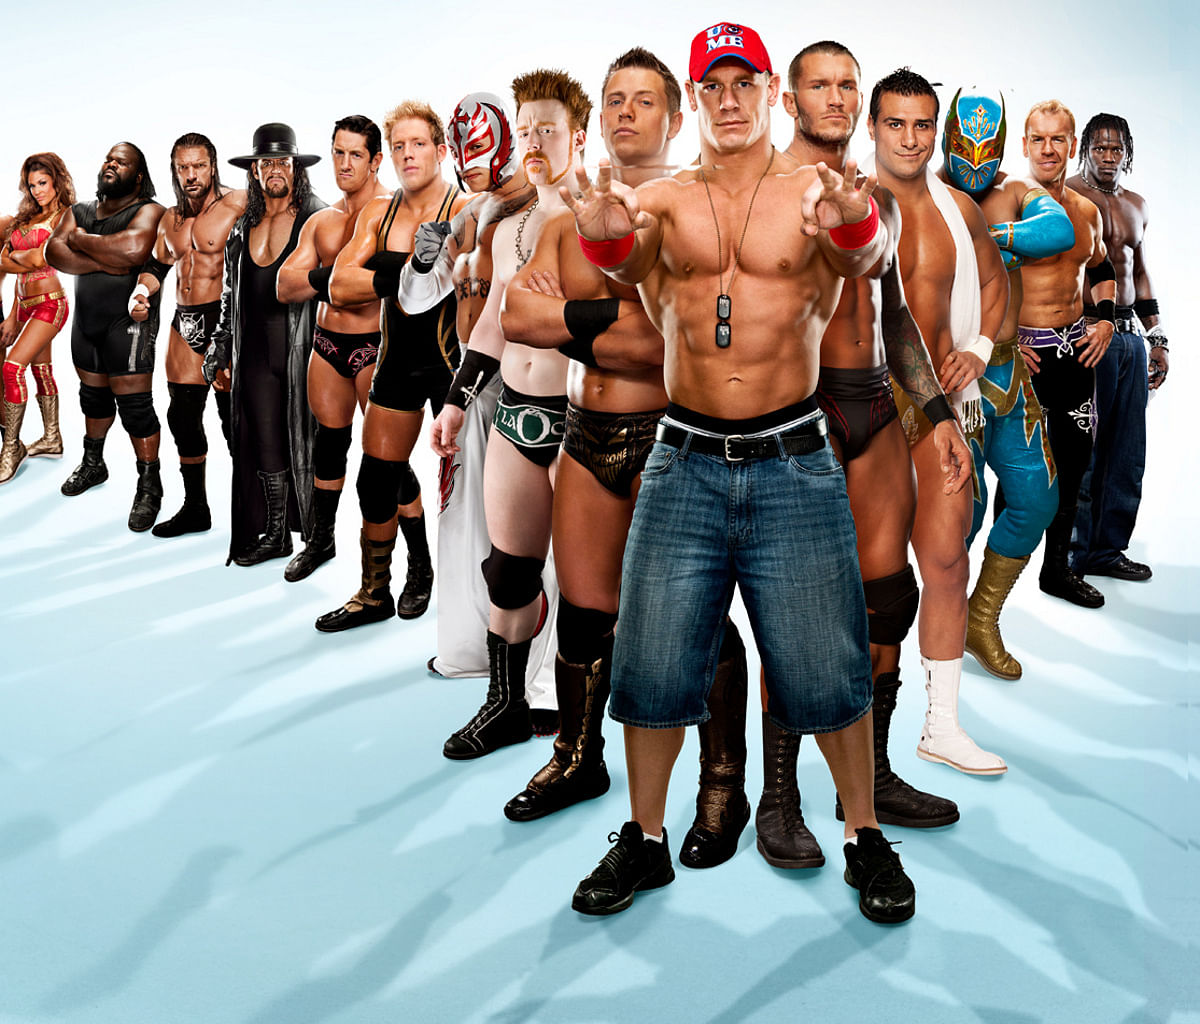 7 reasons why WWE is among the best value for money entertainment.